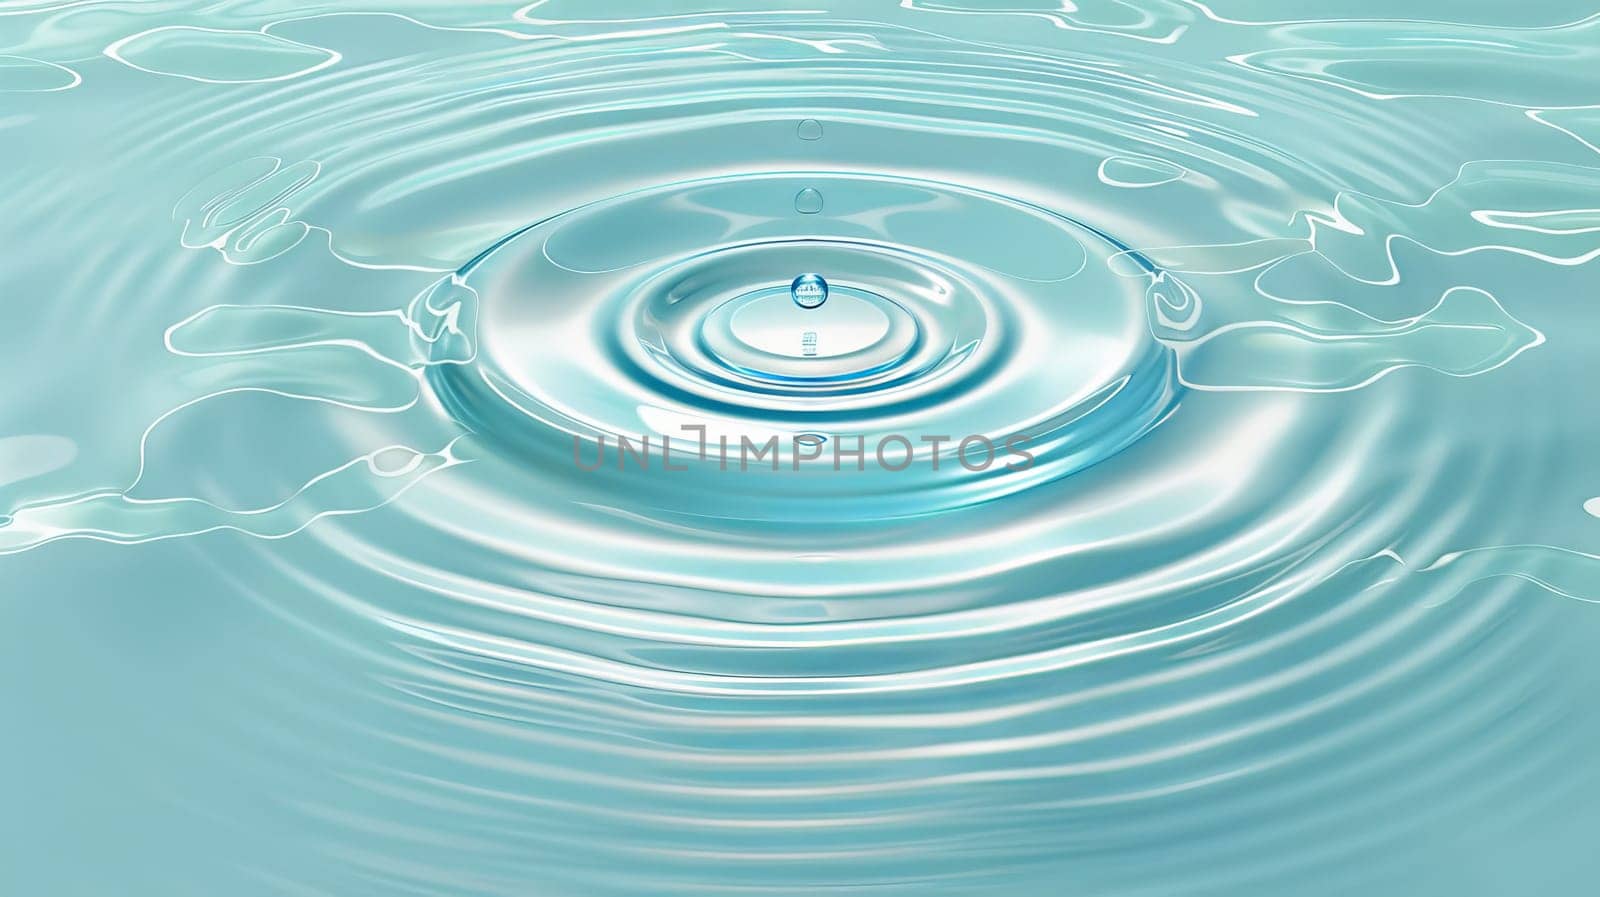 Ripple effect on clear aqua top view. Modern realistic concentric rings on liquid surface from falling drop. Ripple effect on transparent aqua background.